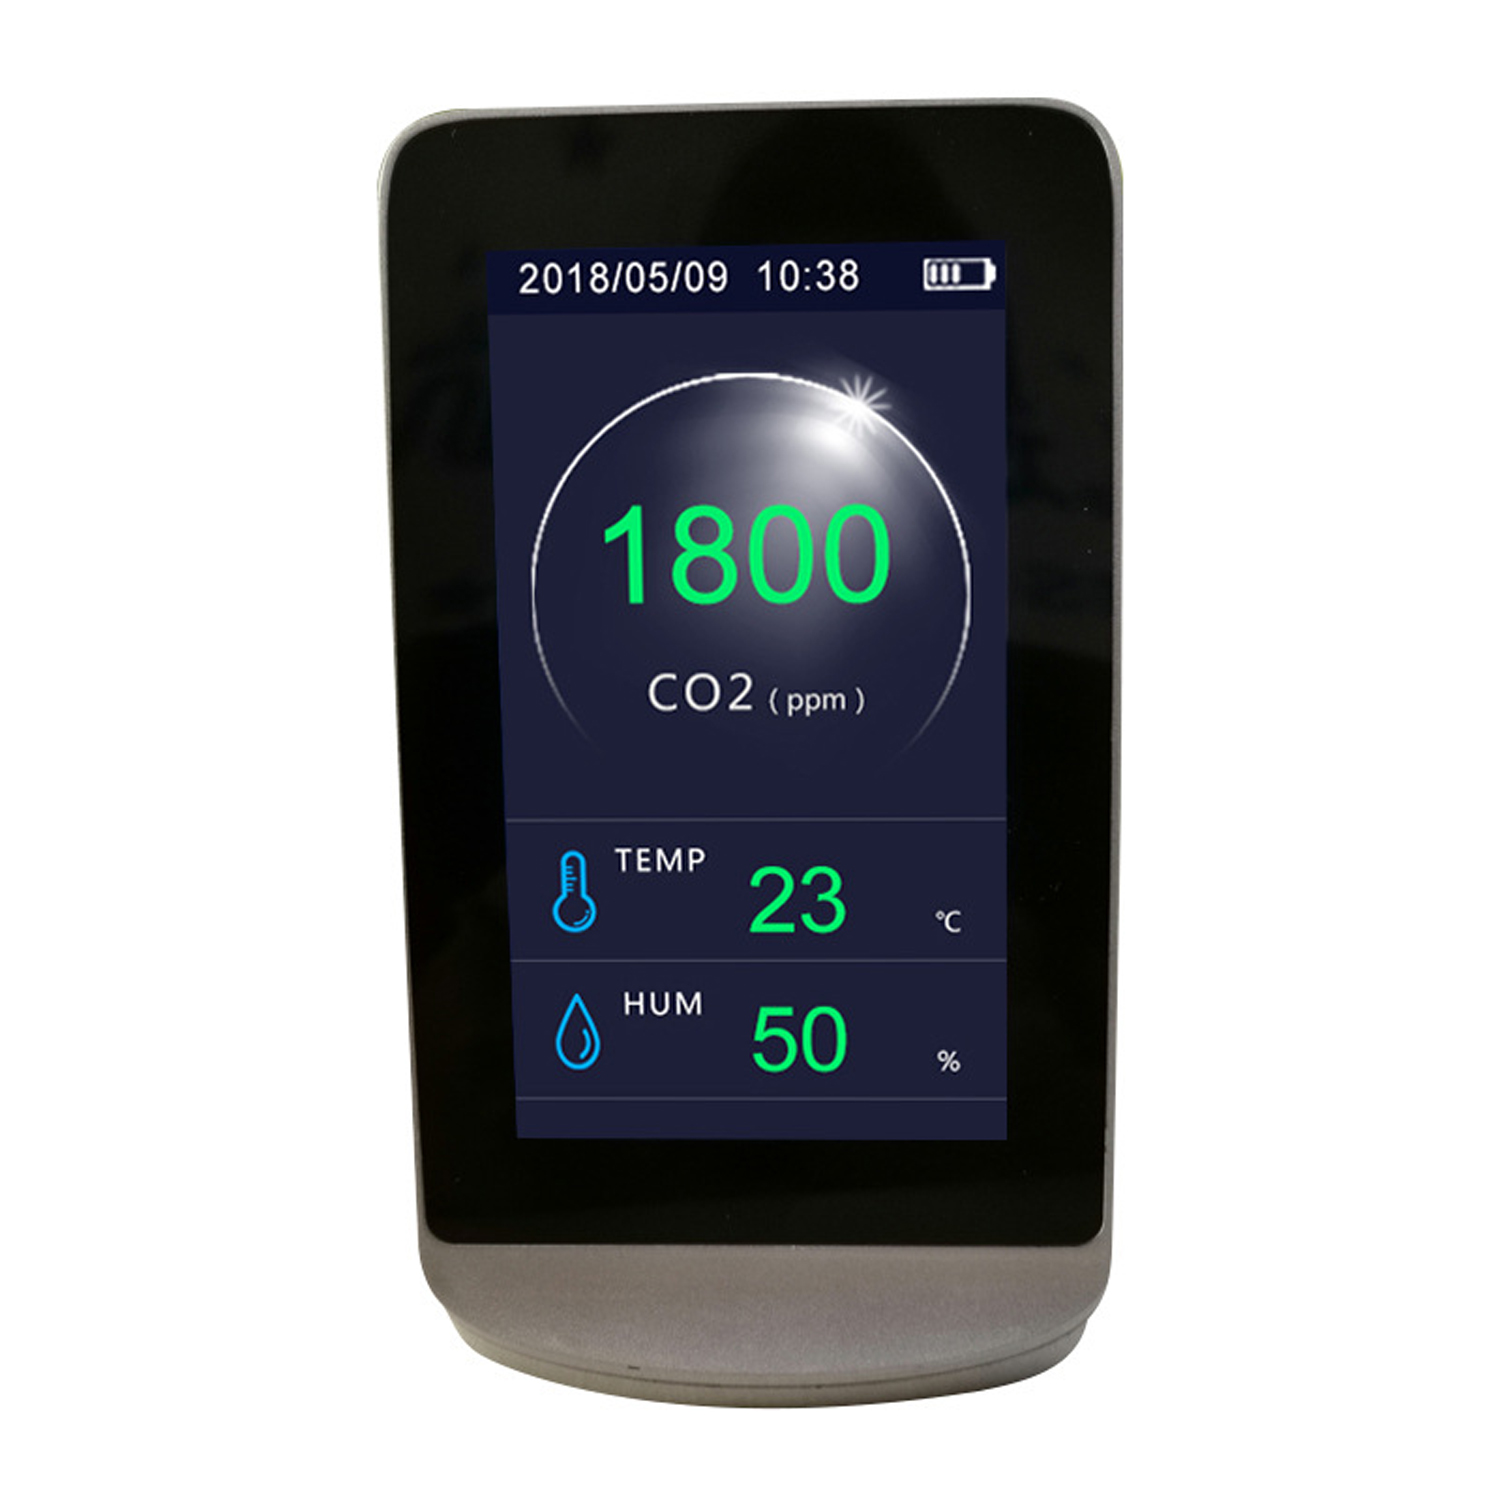 0-5000ppm Professional CO2 Detector Air Quality Detector Gas Analyzer Monitor LCD Display Multifunctional Thermometer Hygrometer